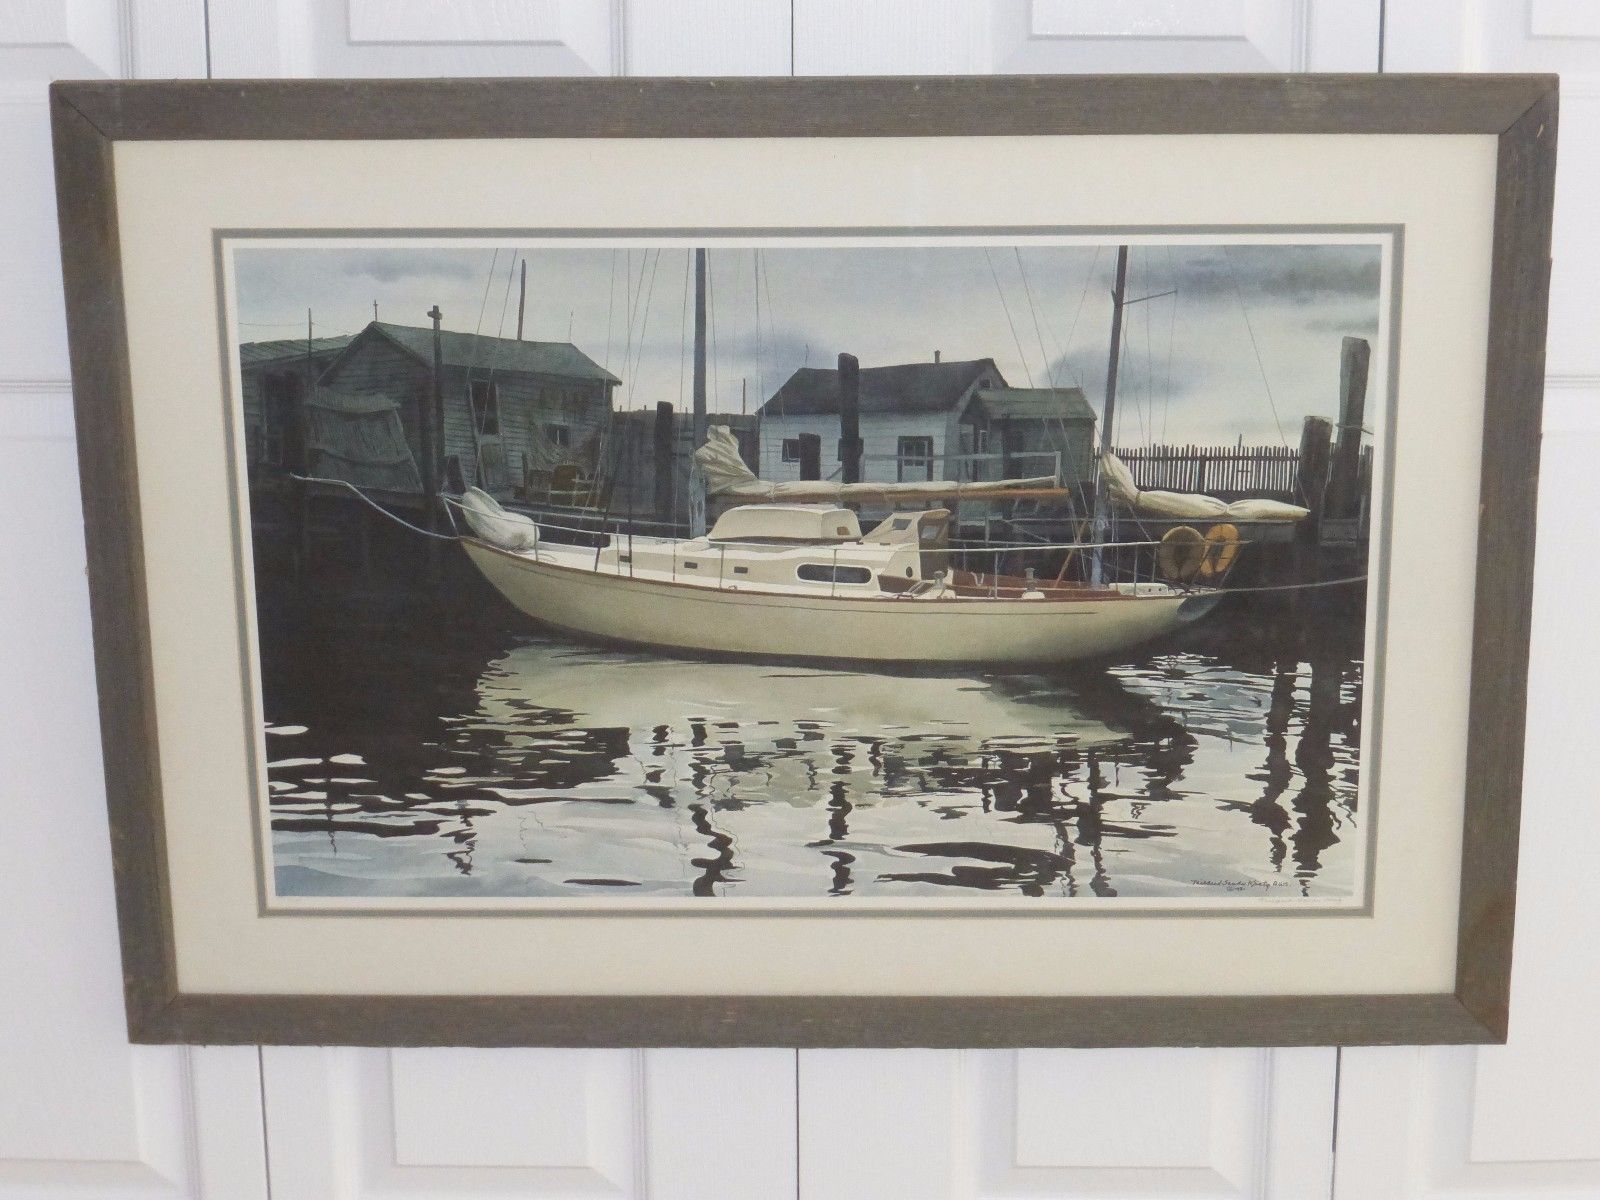 MILDRED SANDS KRATZ AMERICAN WATERCOLOR SOCIETY (AWS) 1981 LARGE SIGNED ARTWORK - $199.00